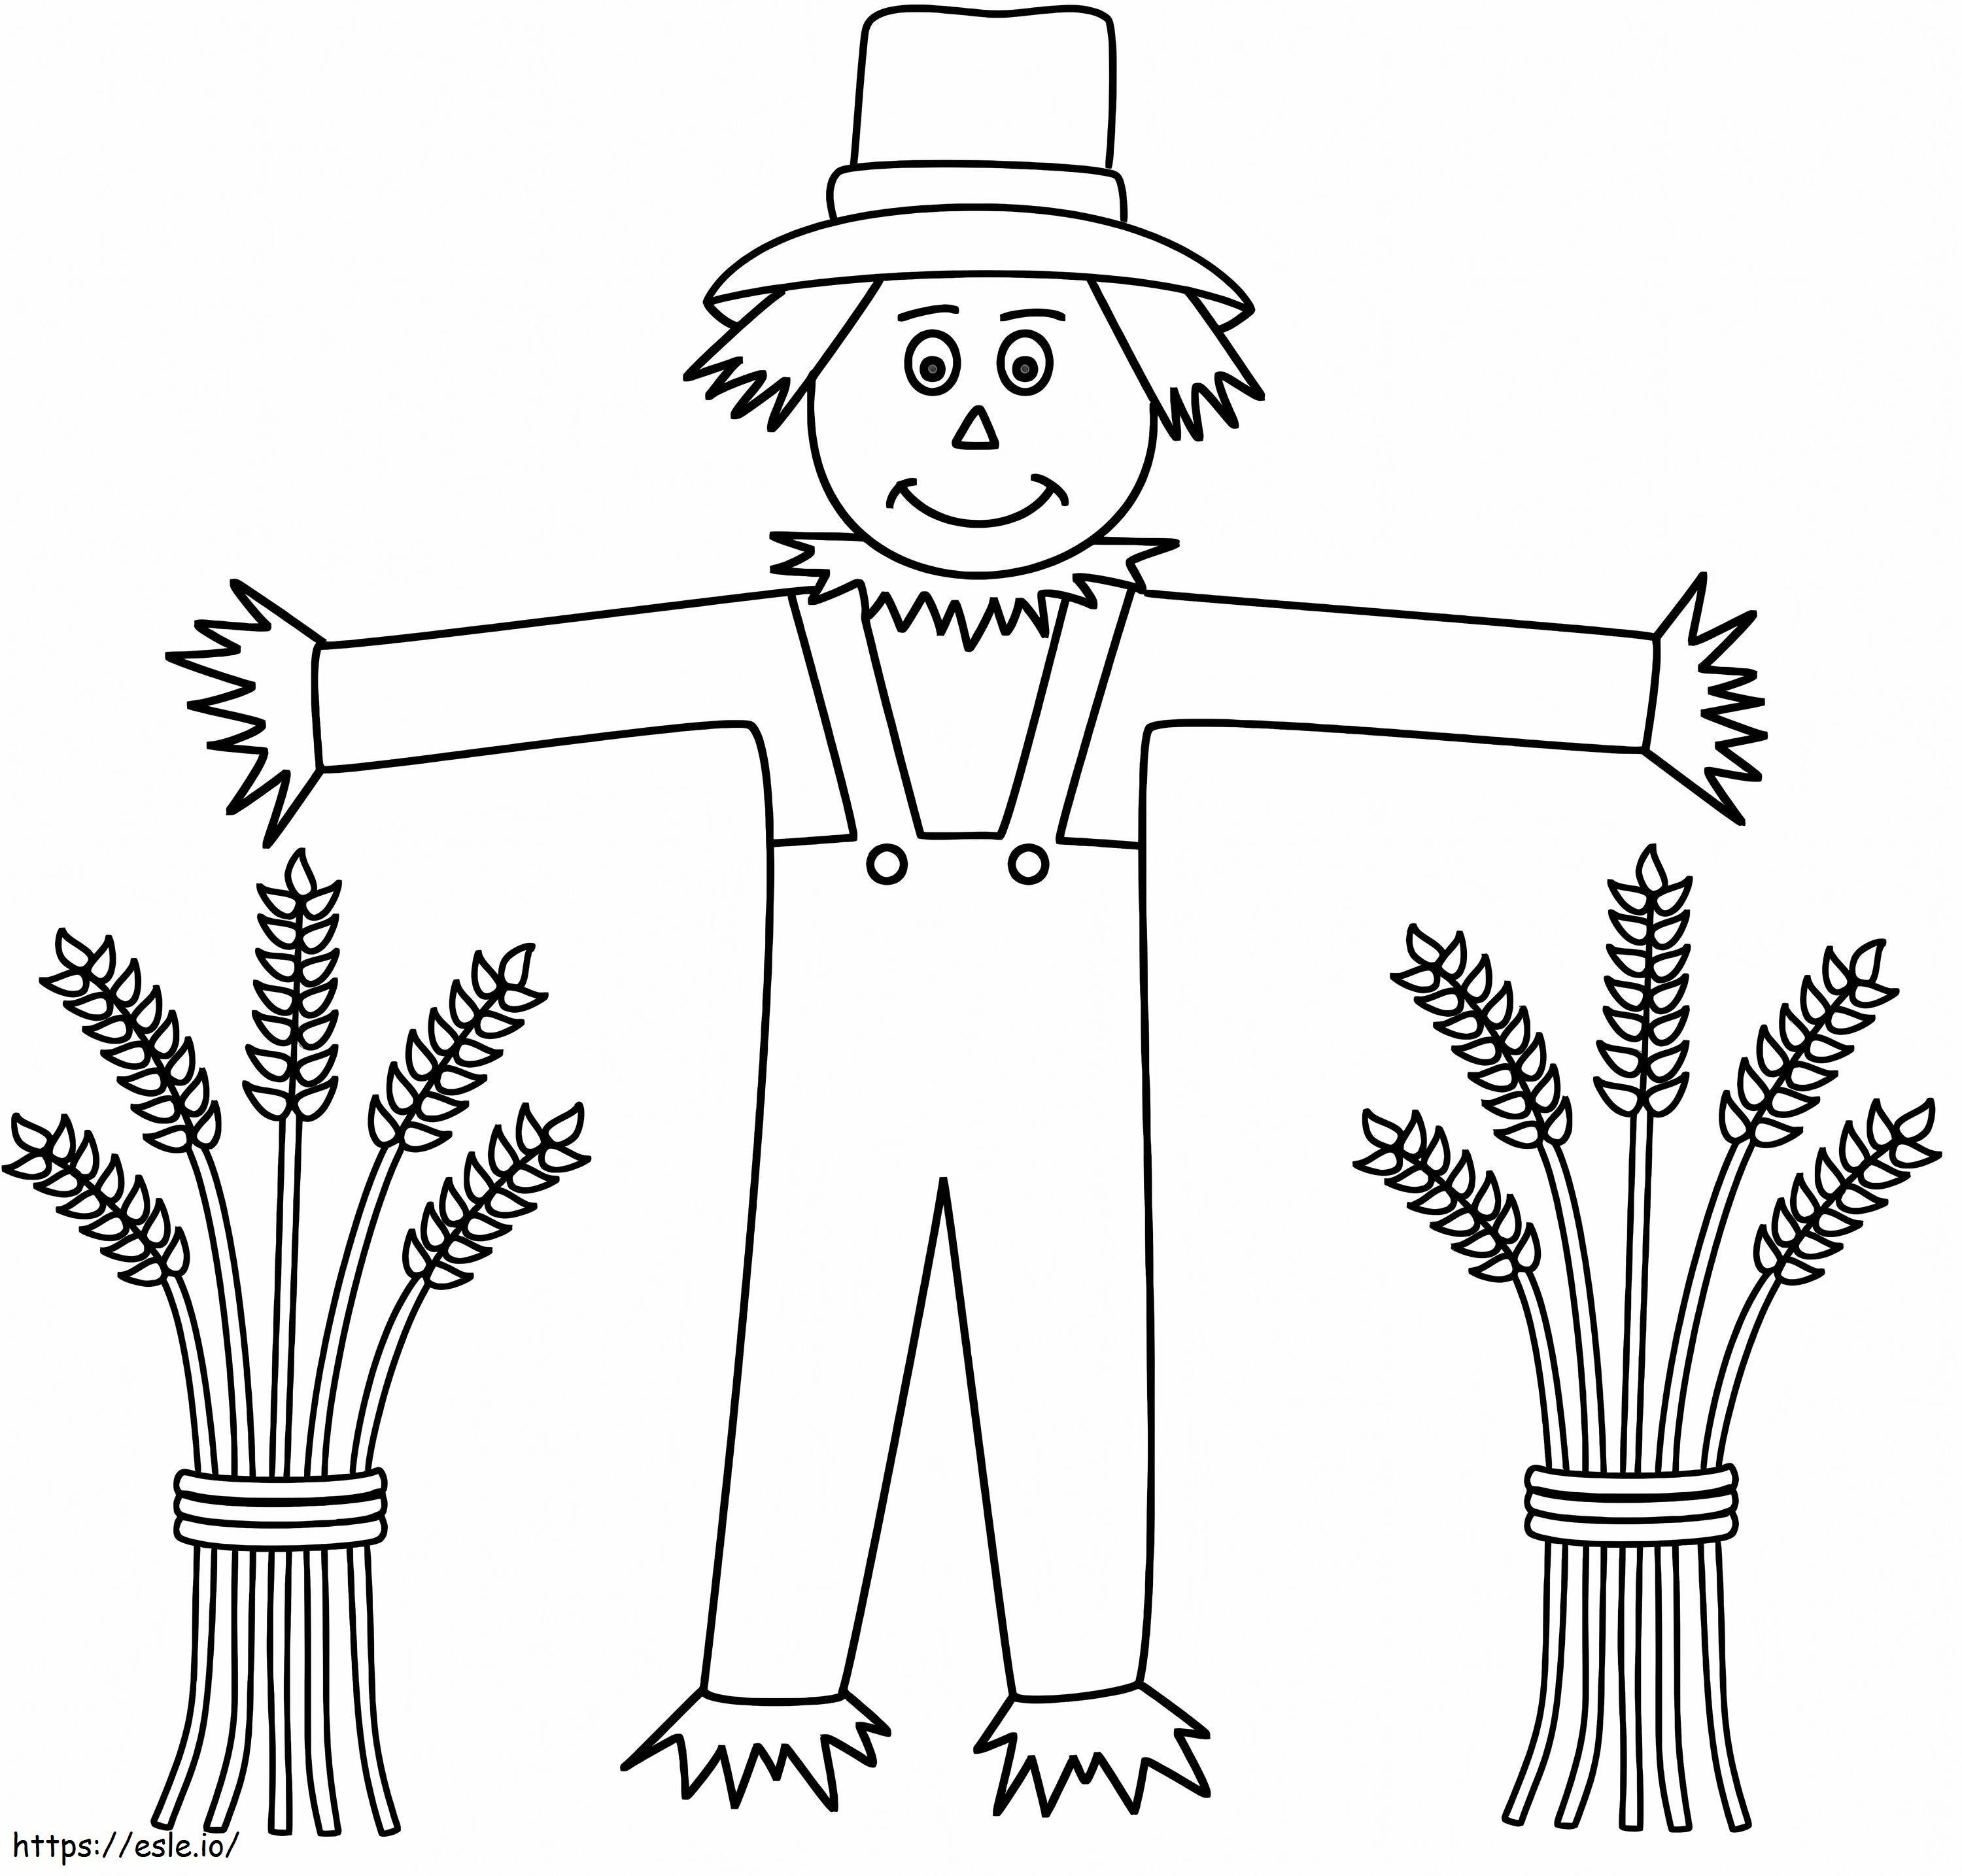 Scarecrow With Sheaves Of Wheat coloring page